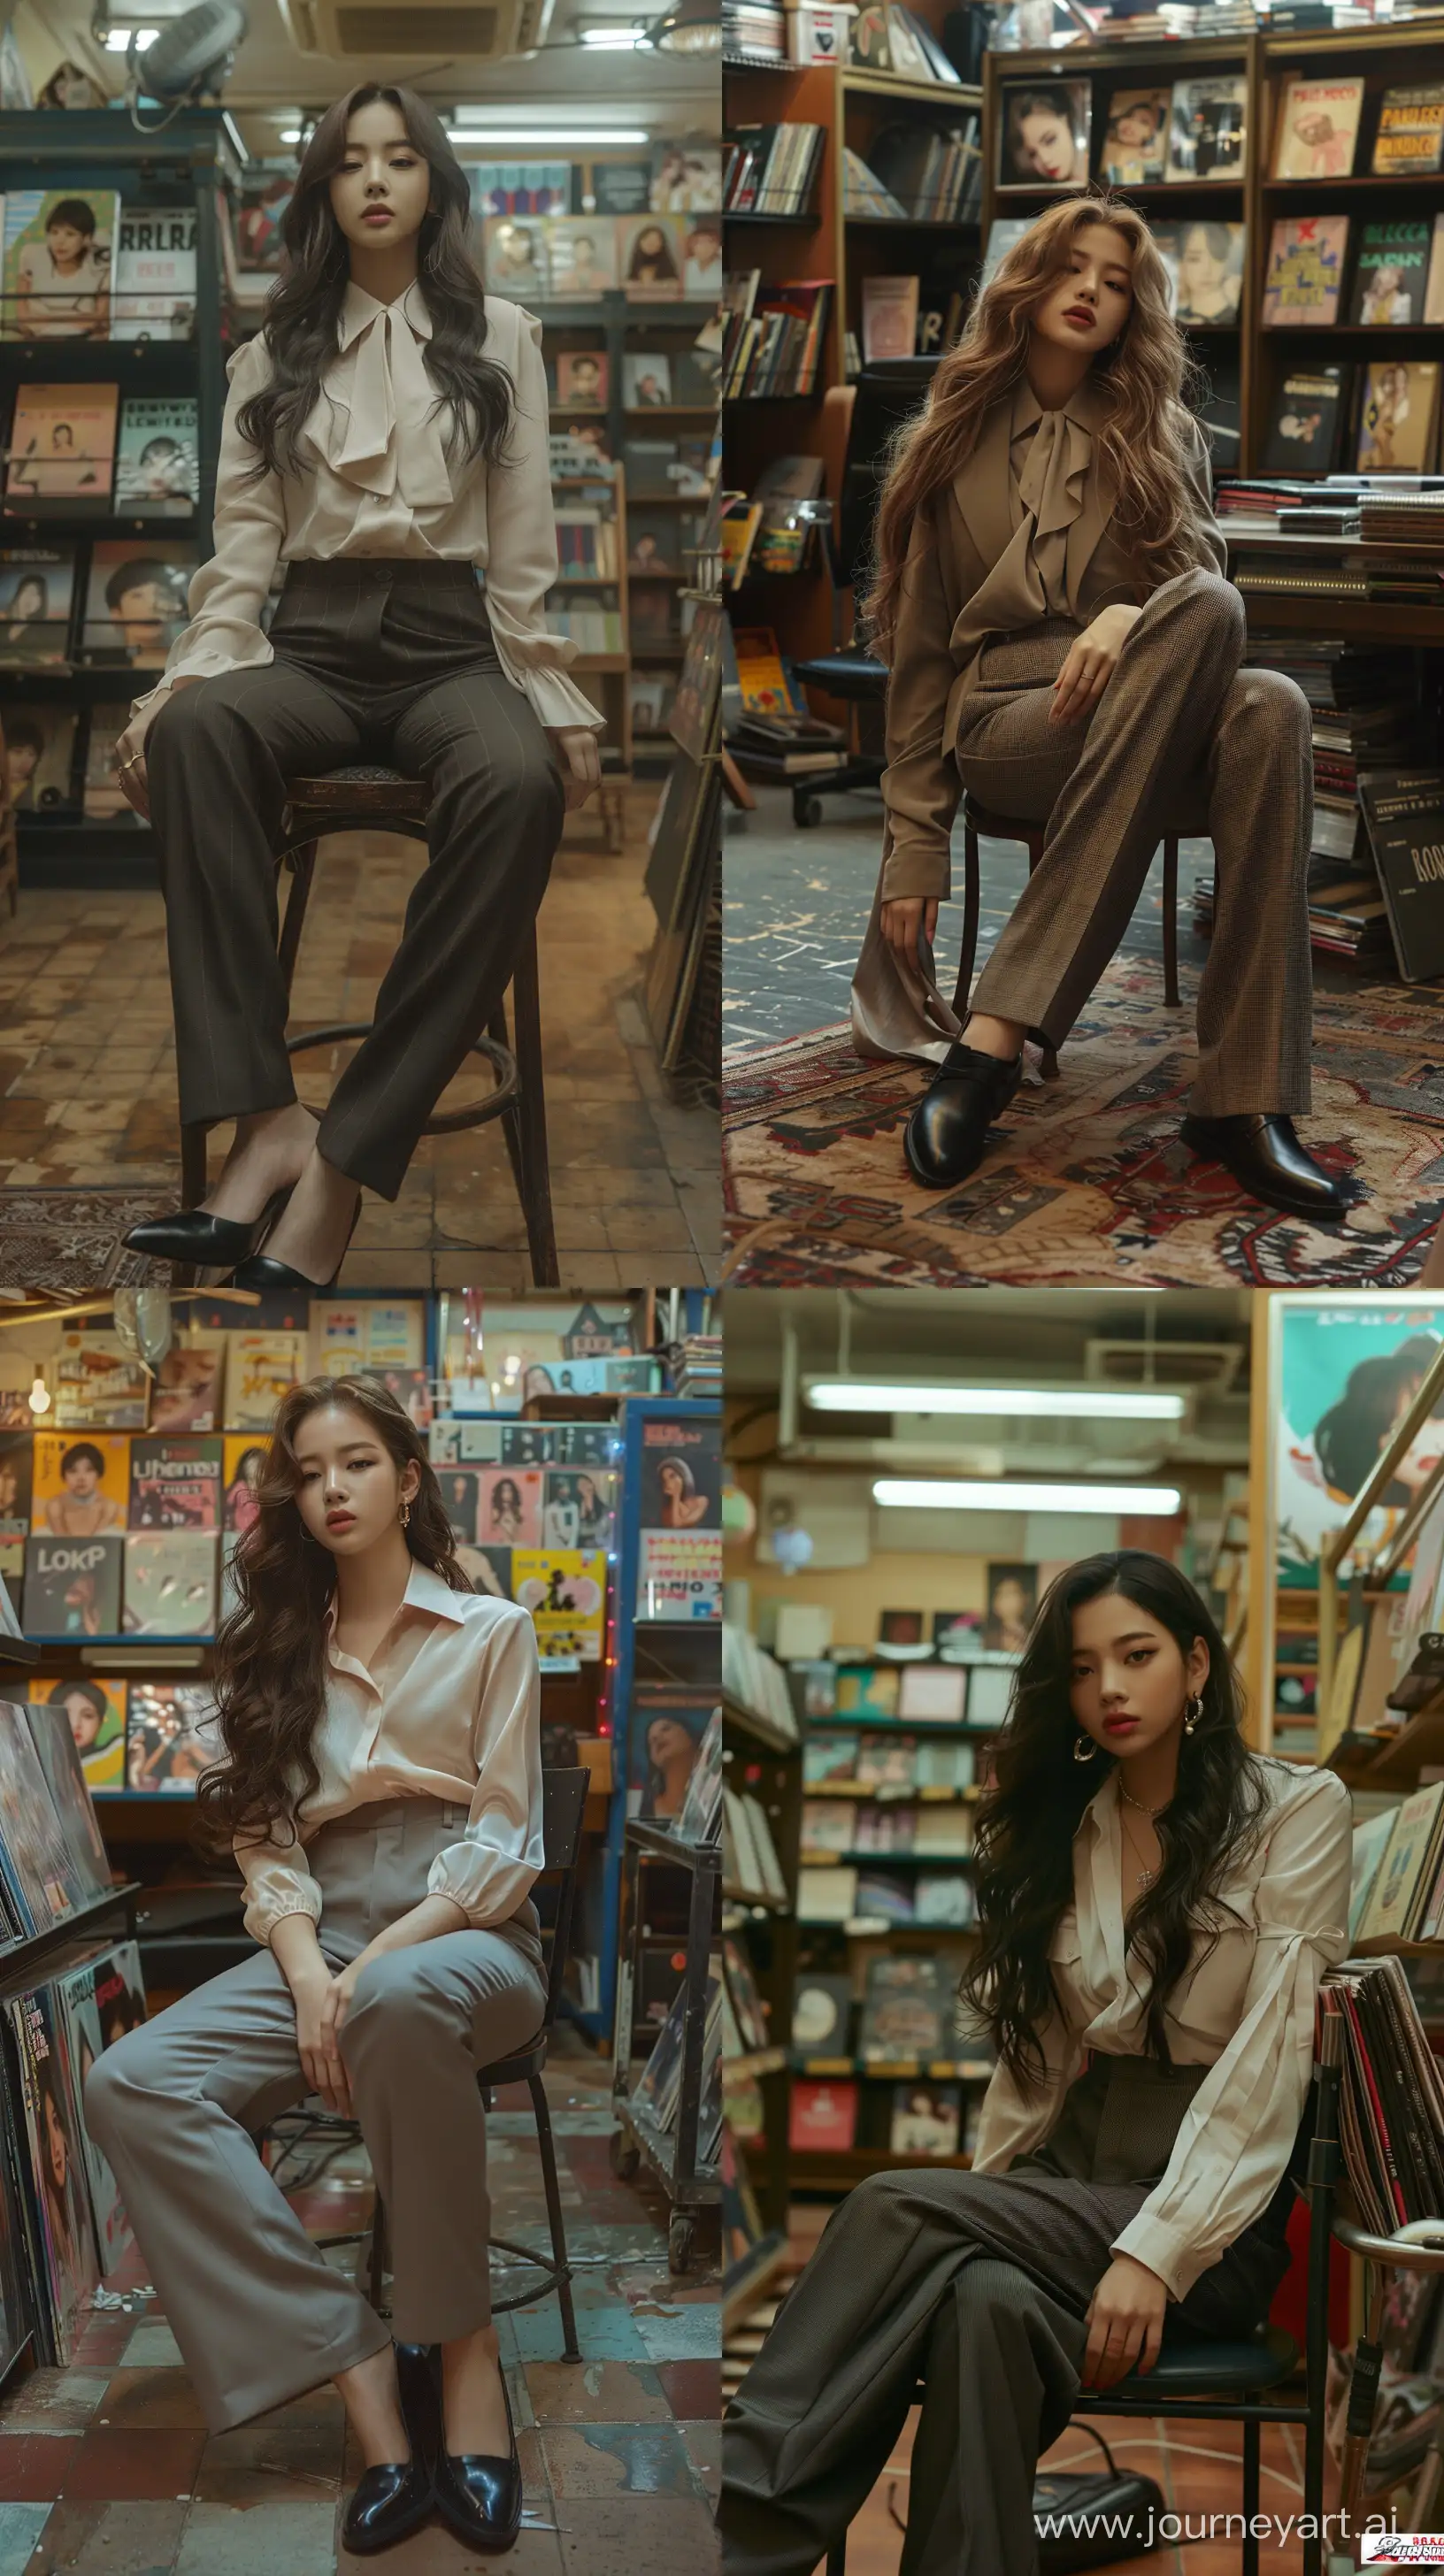 Mysterious-Nocturnal-Scene-Blackpinks-Jennie-in-Simple-Blouse-and-Suit-Pants